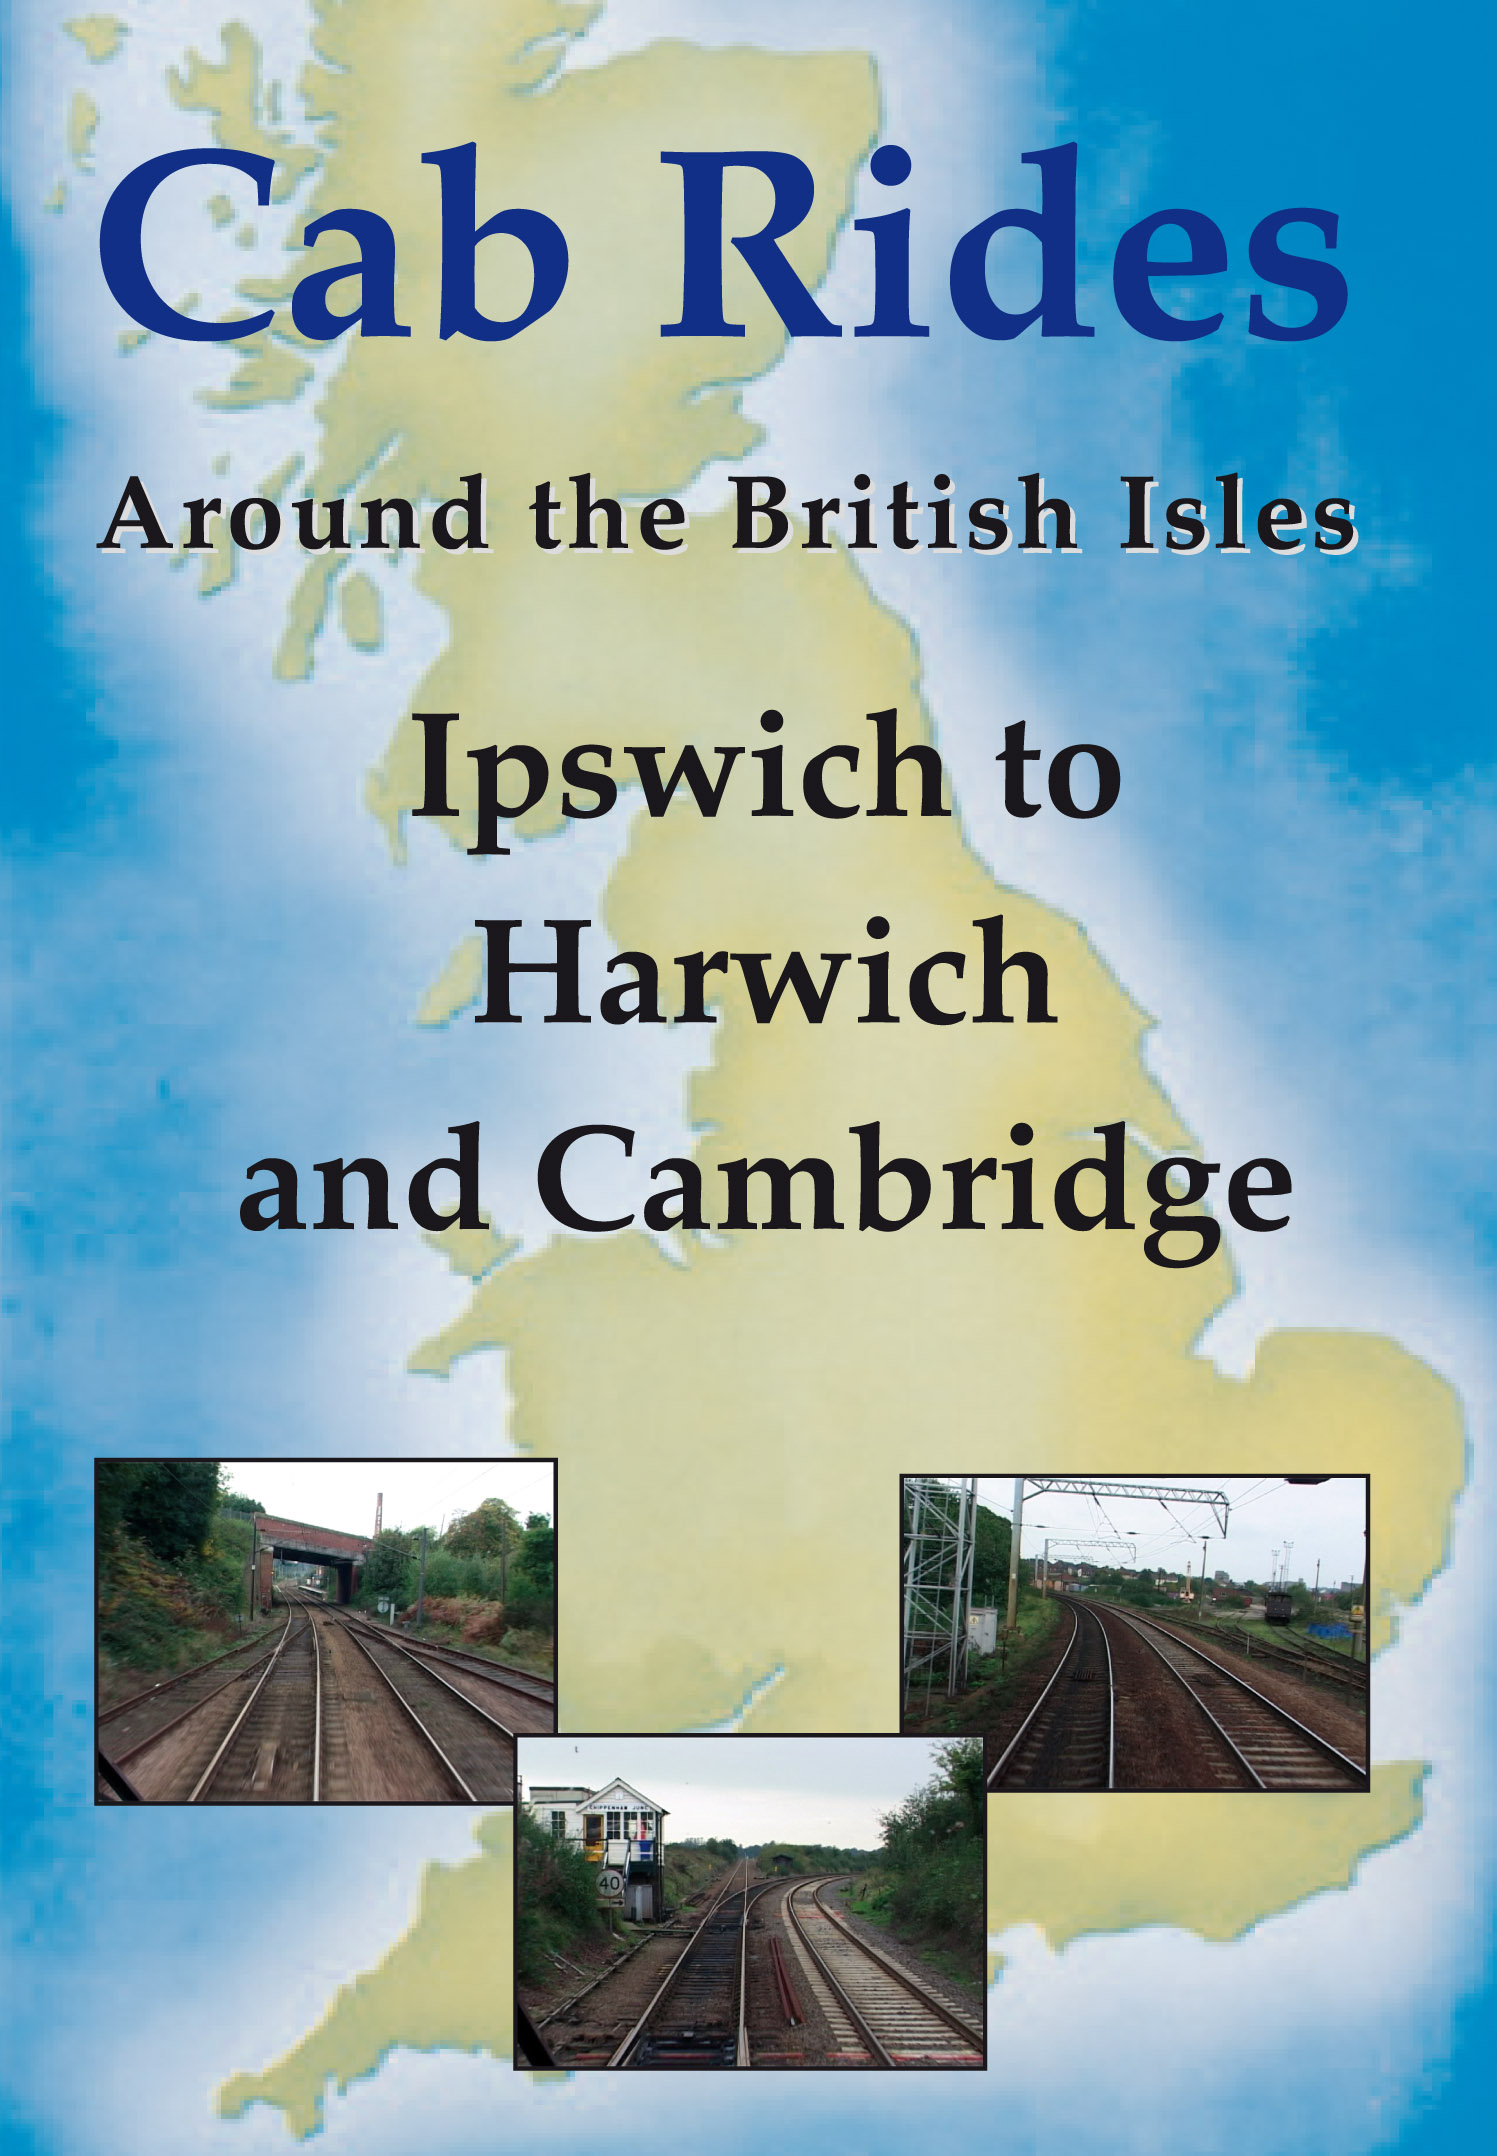 Cab Rides Around the British Isles: Ipswich to Harwich and then Cambridge in 2001